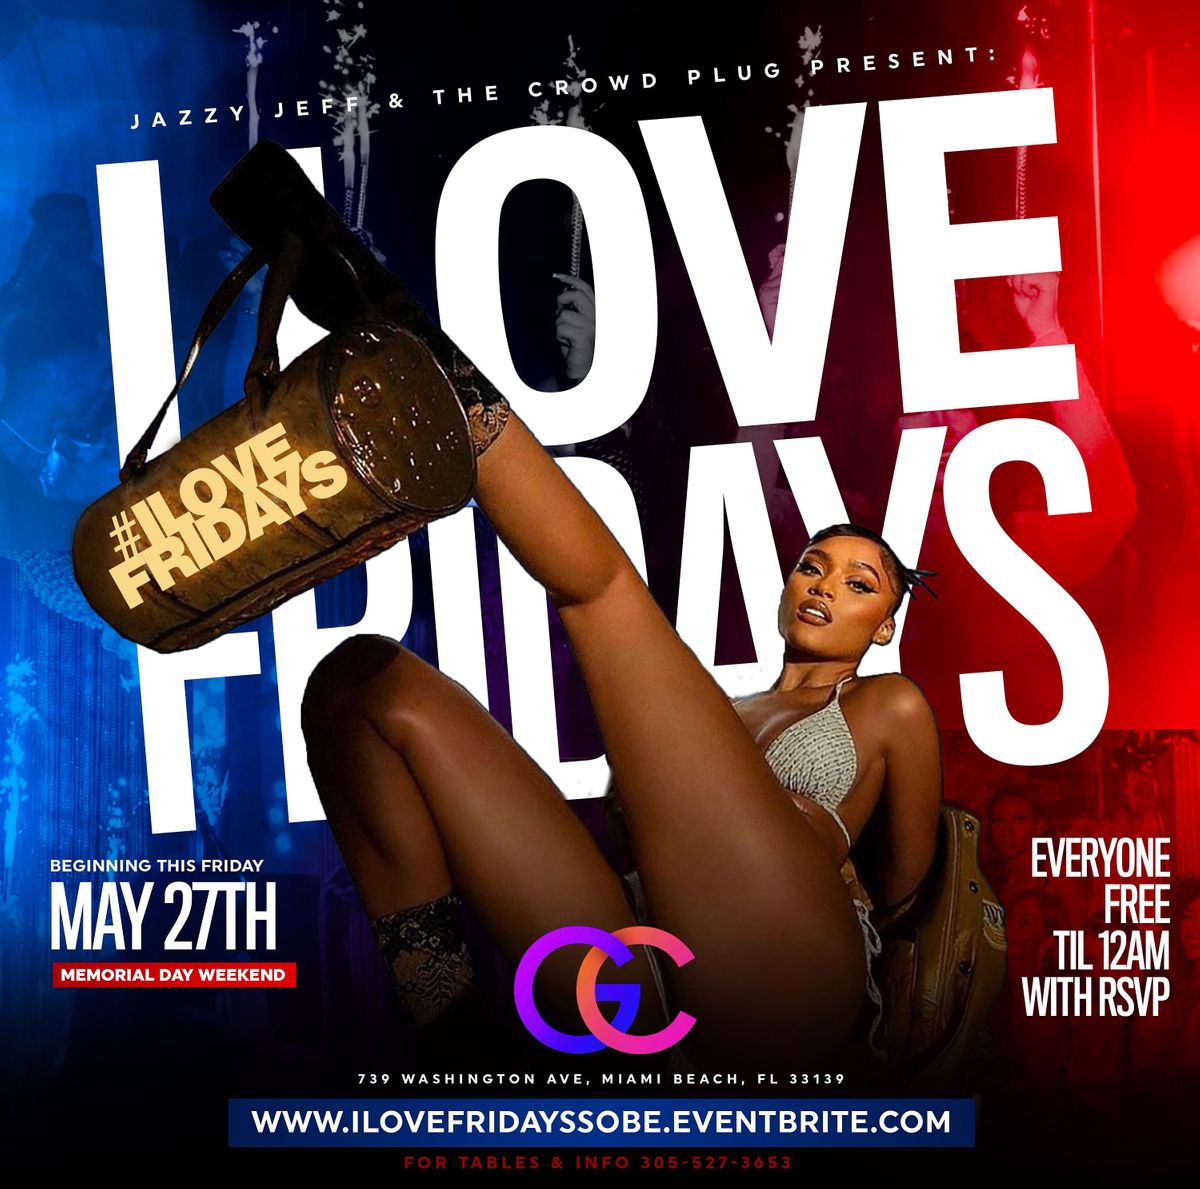 I LOVE FRIDAYS: THE ALL NEW SEXIEST NIGHT ON SOUTH BEACH!